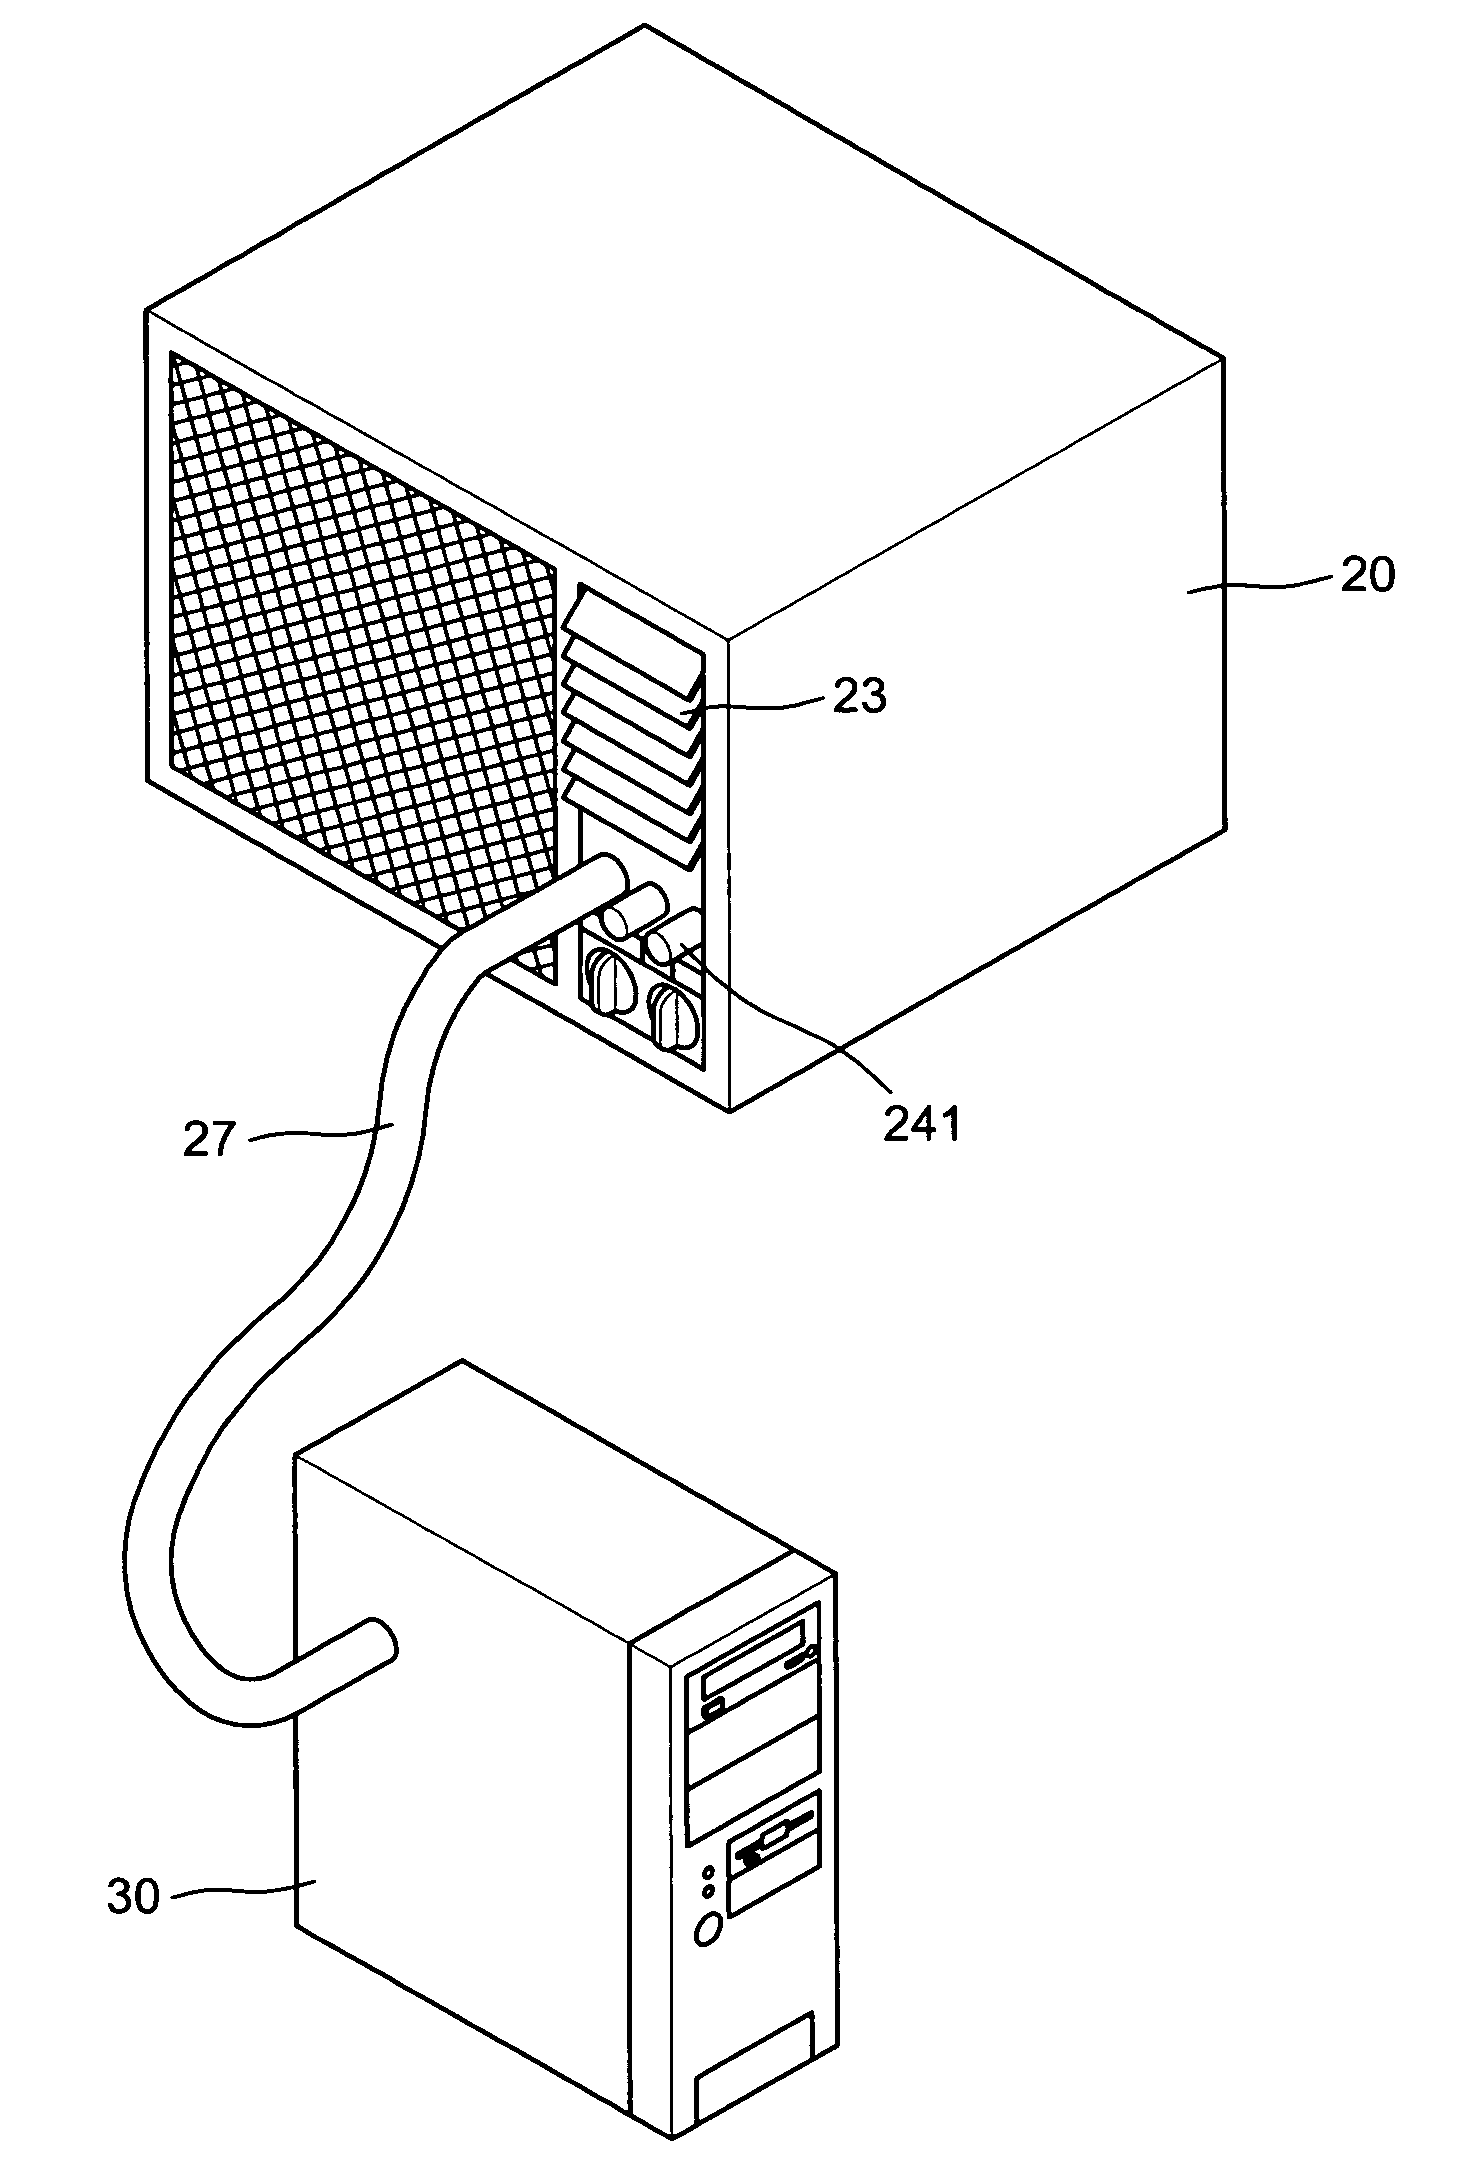 Device to convey the cool air from an air-conditioner into a computer